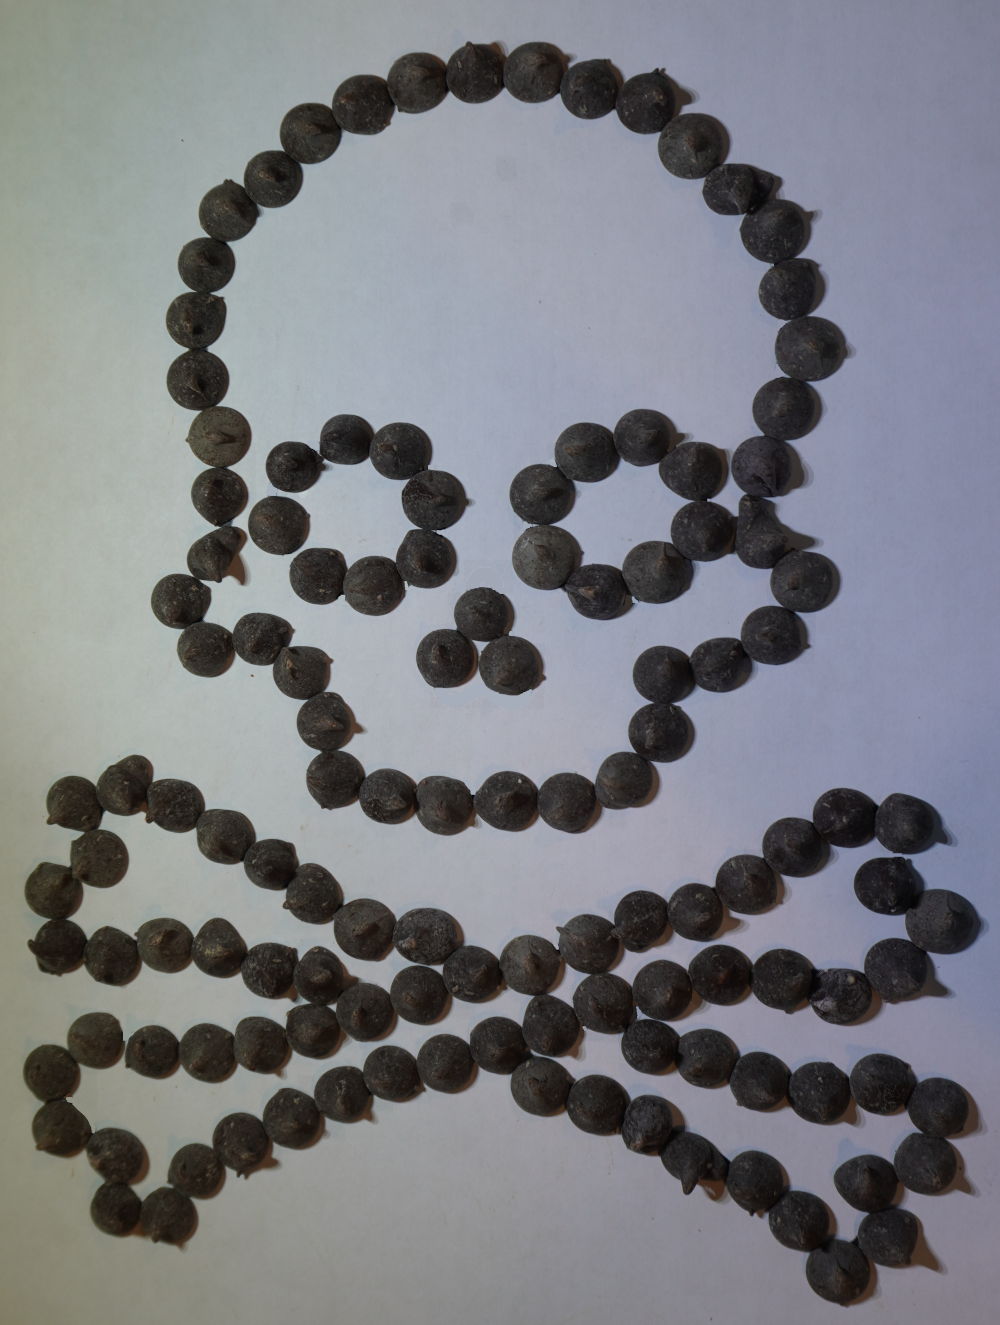 A skull and cross bones made of chocolate chips.